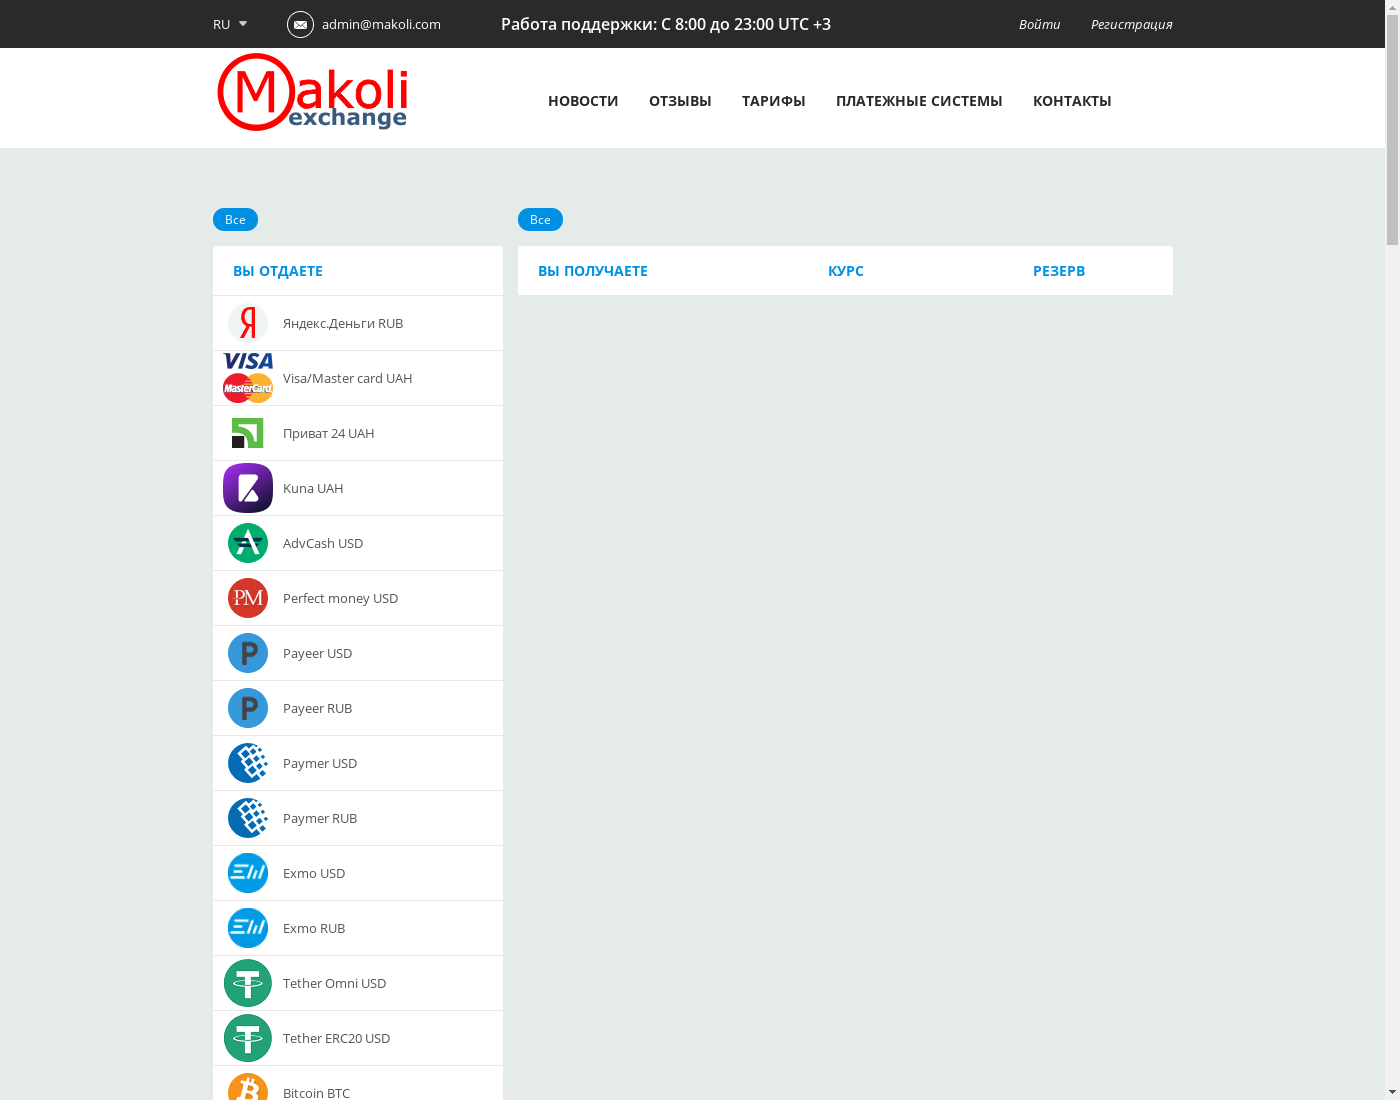 makoli user interface: the home page in English